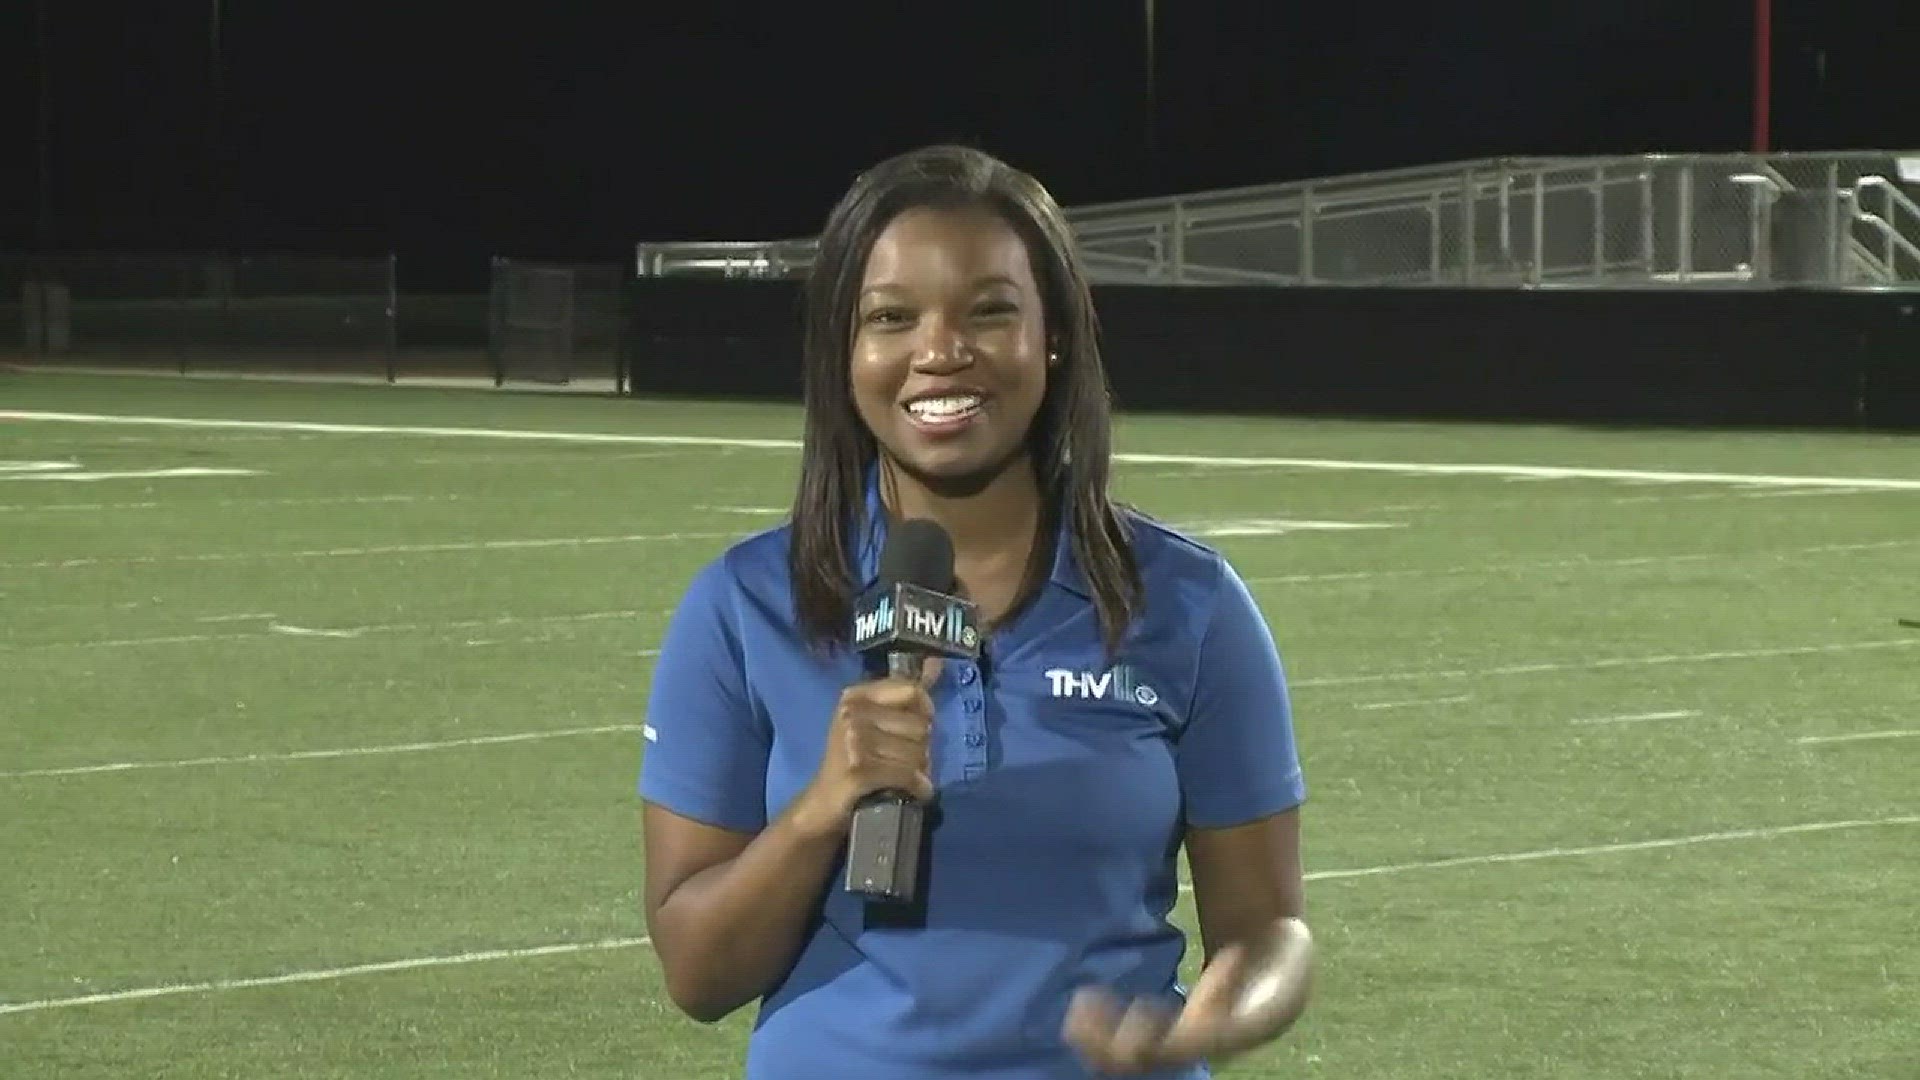 THV11's Raven Richard plays a joke on her co-anchors, Rob Evans & Amanda Jaeger while at Friday's 'Home Field Advantage' in Maumelle.